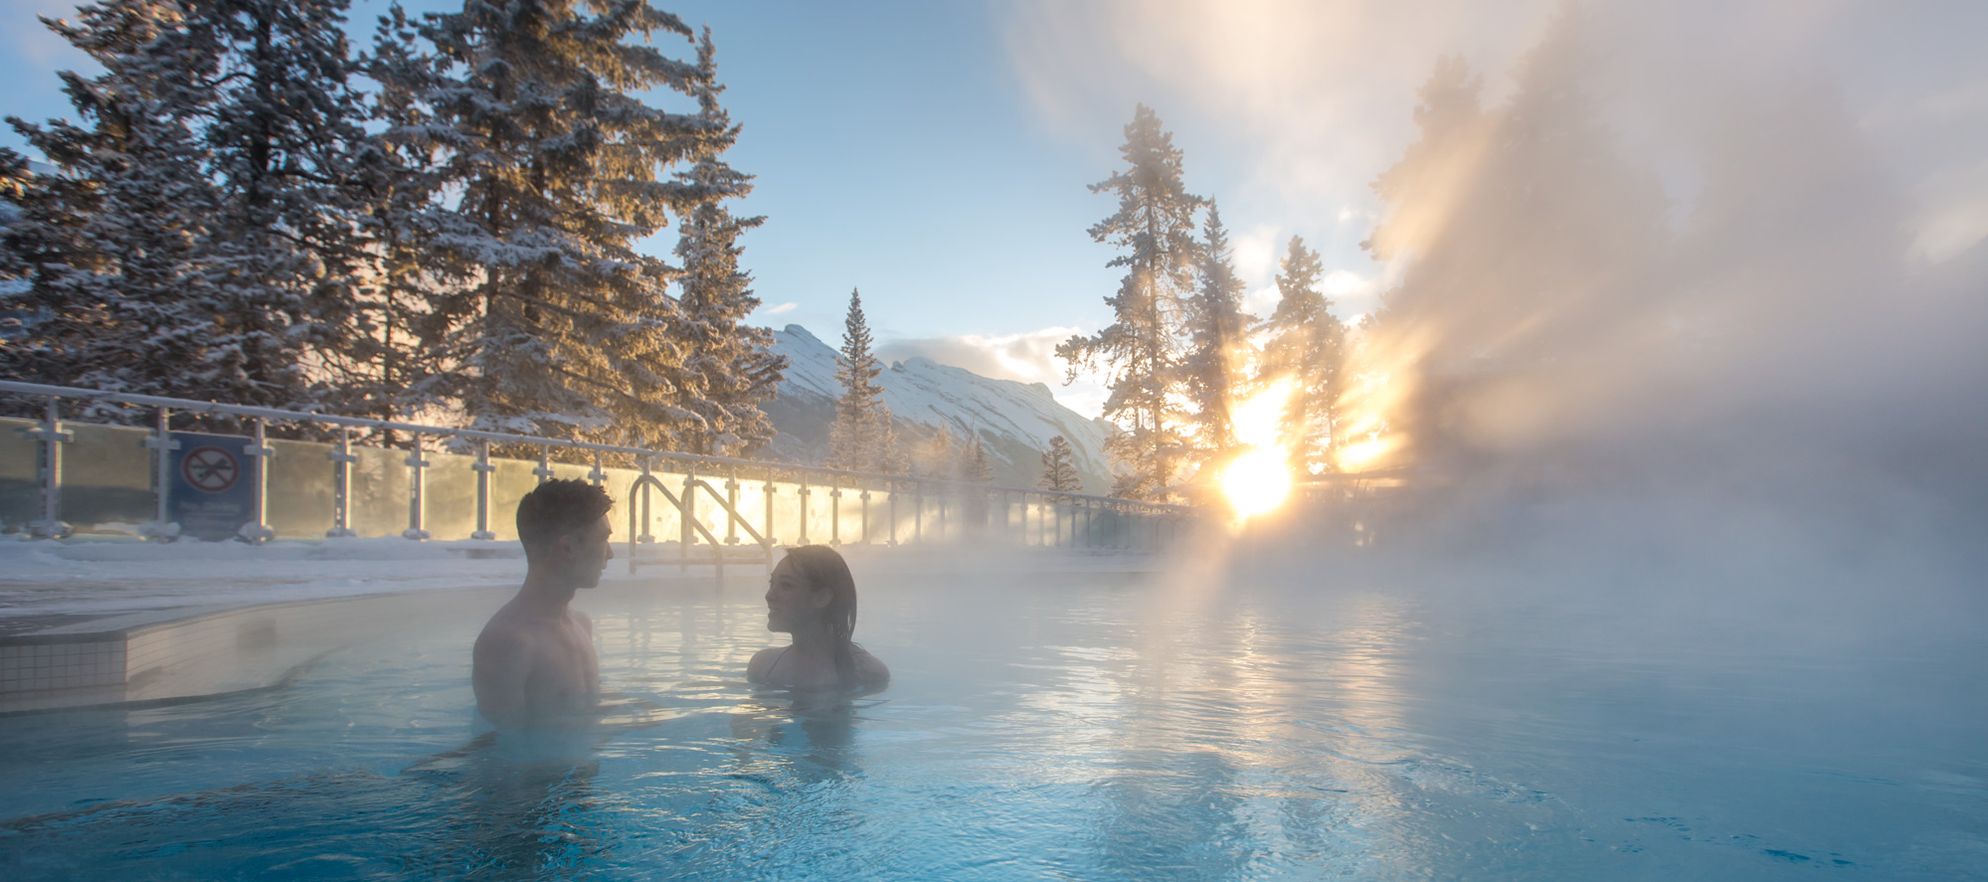 Your complete guide to hot springs and spas in Banff National Park